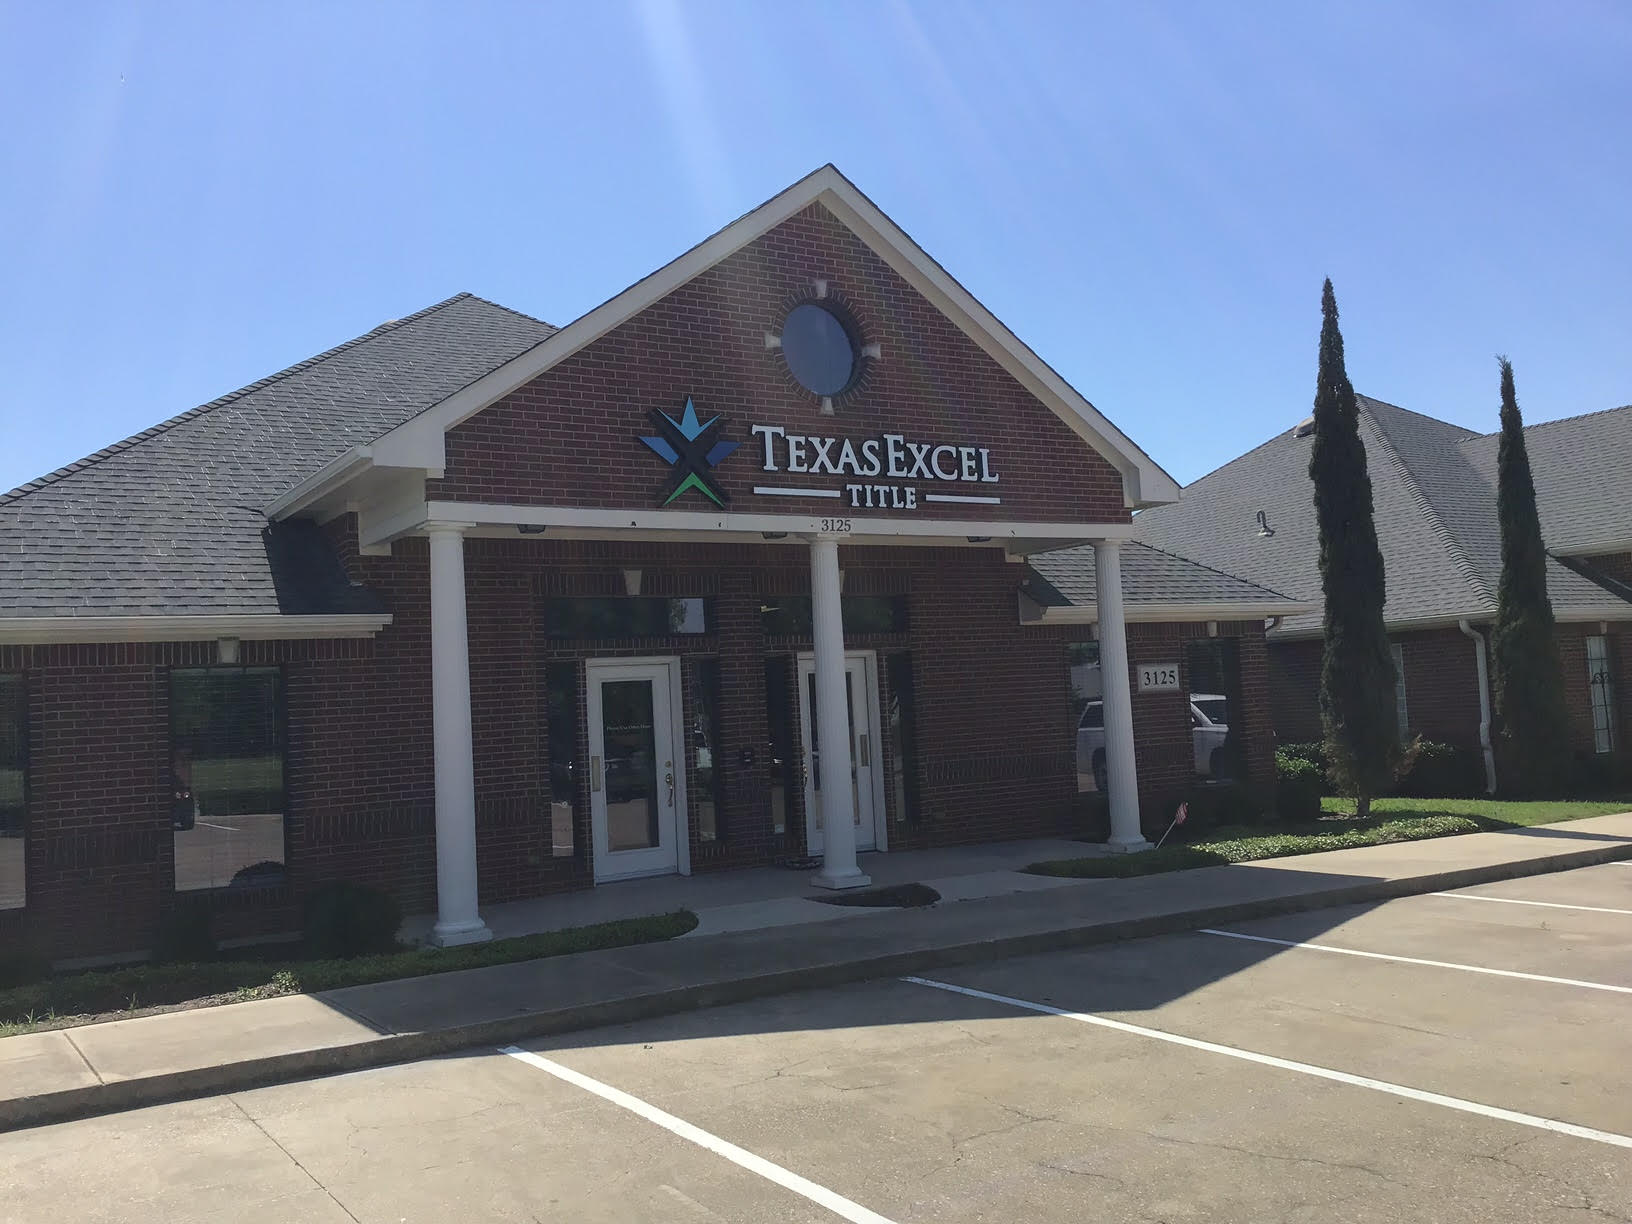 Custom business signs of Texas Excel installed by Priority Signs & Graphics in Dallas, TX